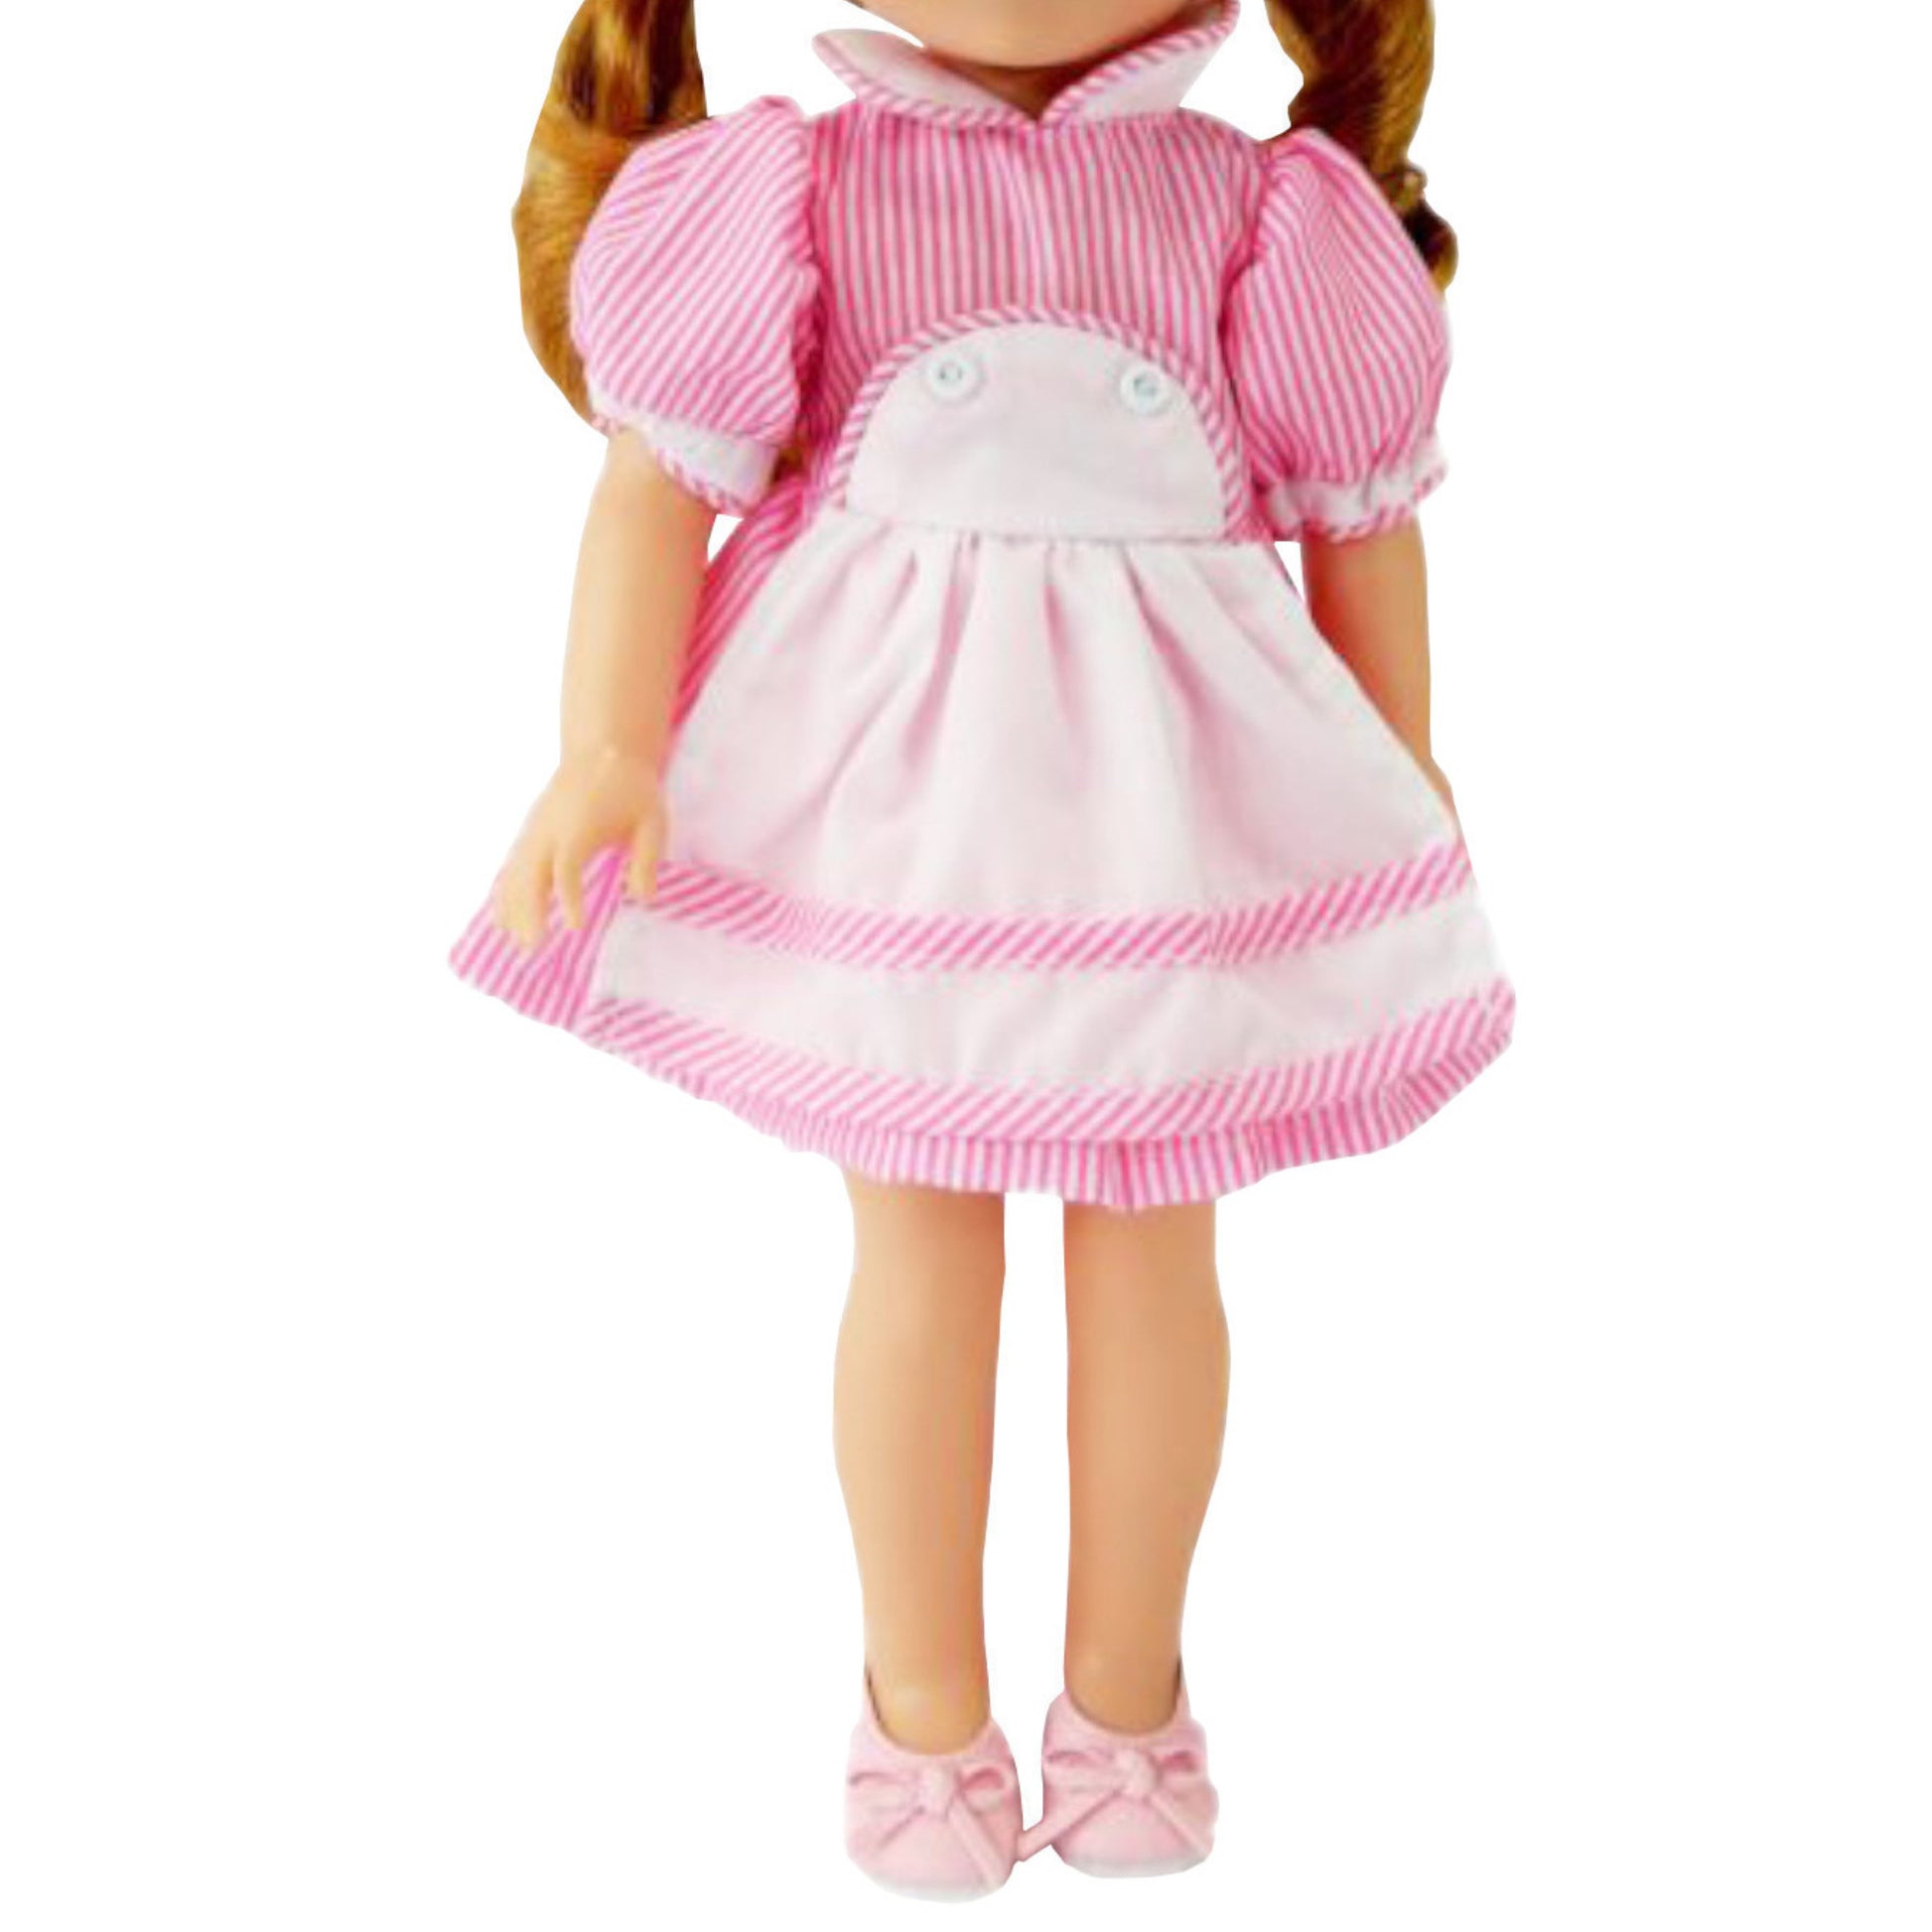 Candy Stripe Nurse Outfit for 14 1/2-inch dolls with doll